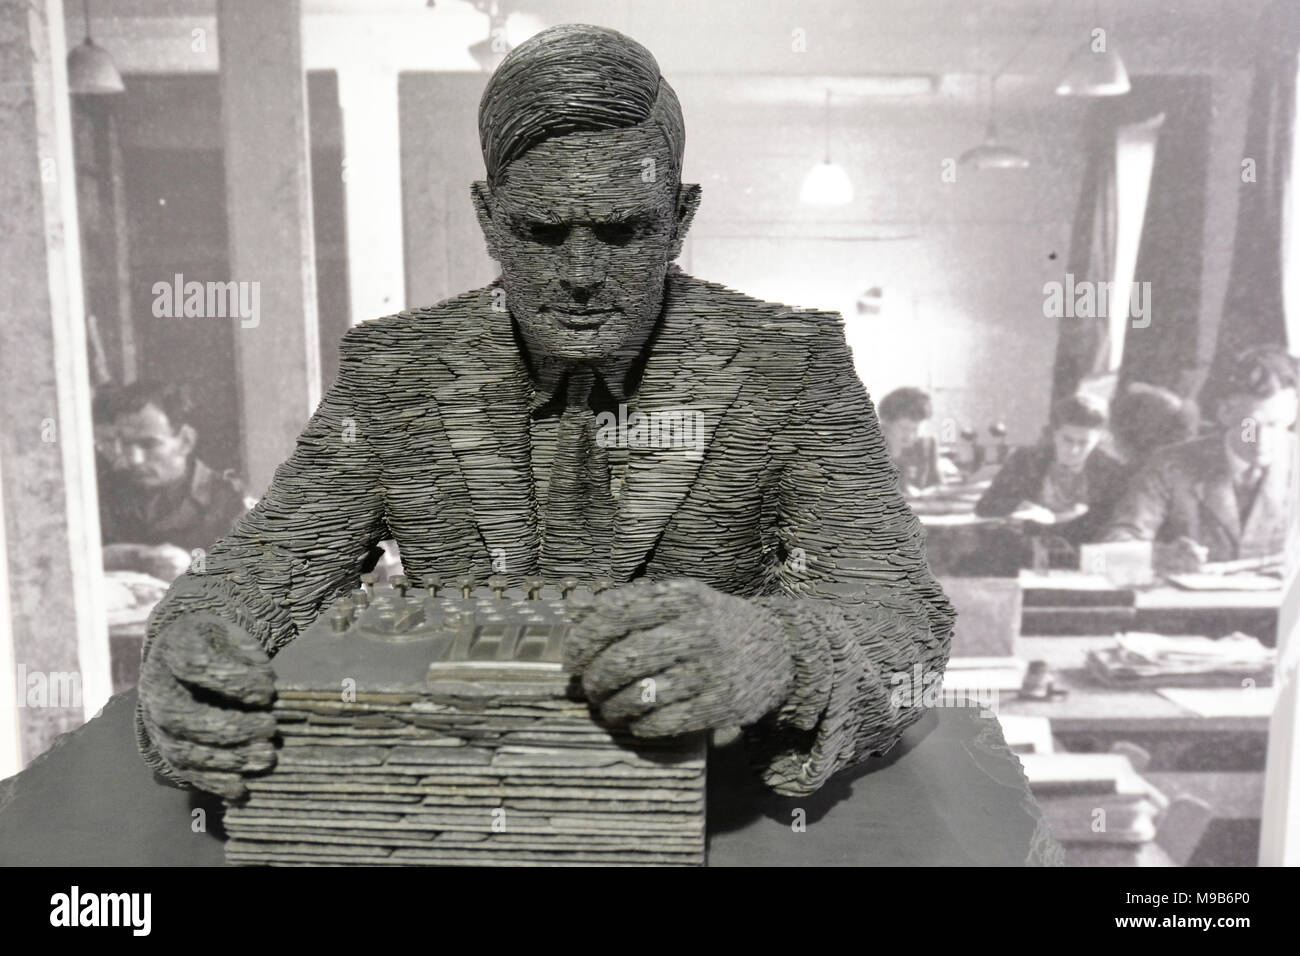 Sculpture of Alan Turing at Bletchley Park, England, UK Stock Photo